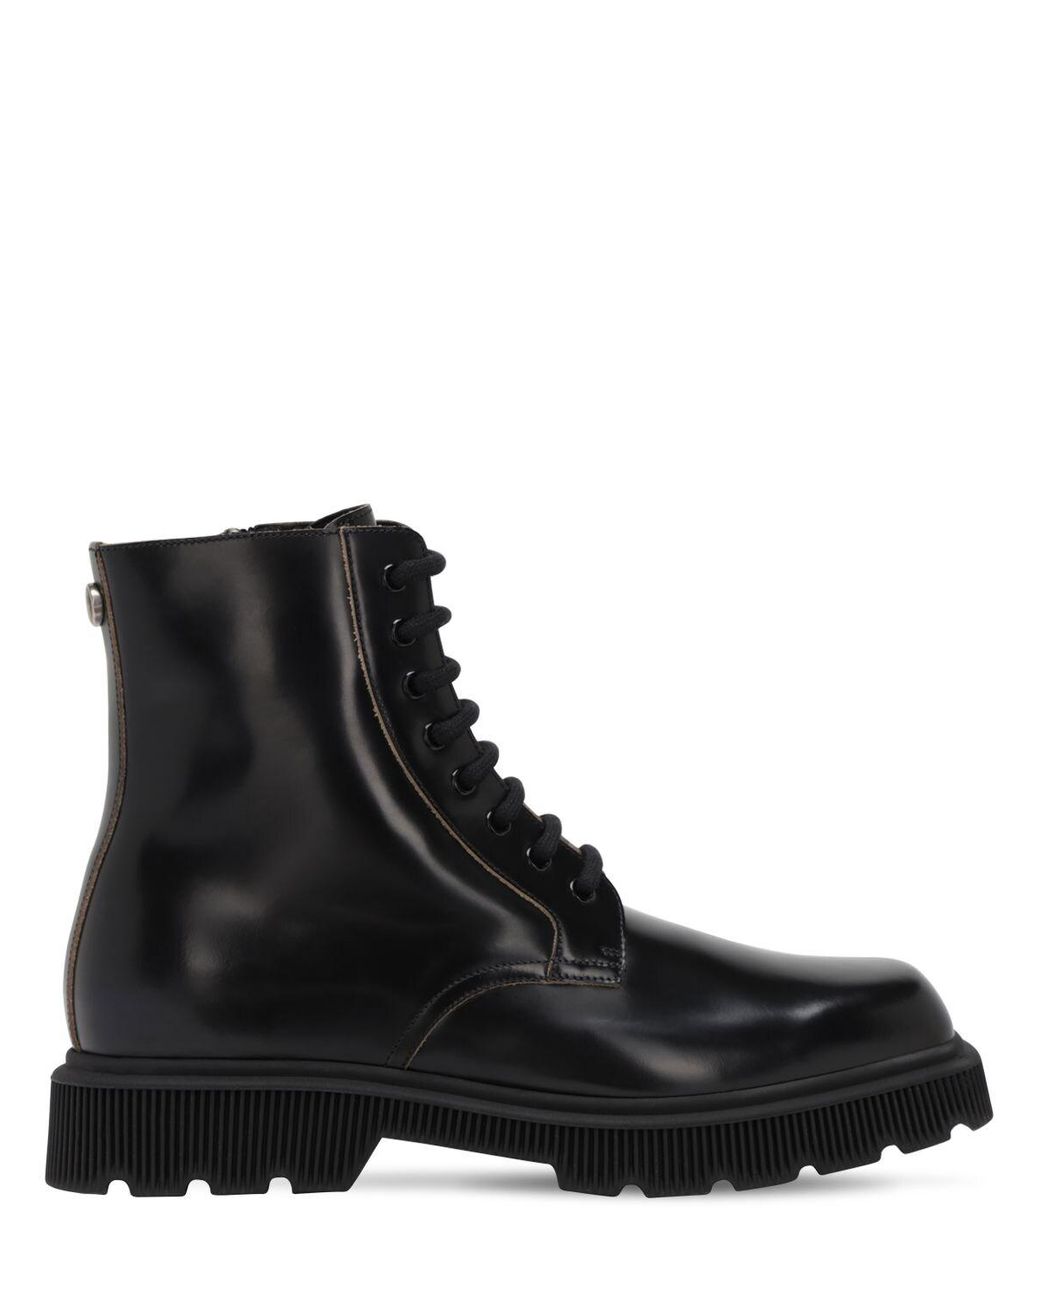 Gucci Gg Metal Leather Combat Boots in Black for Men - Lyst